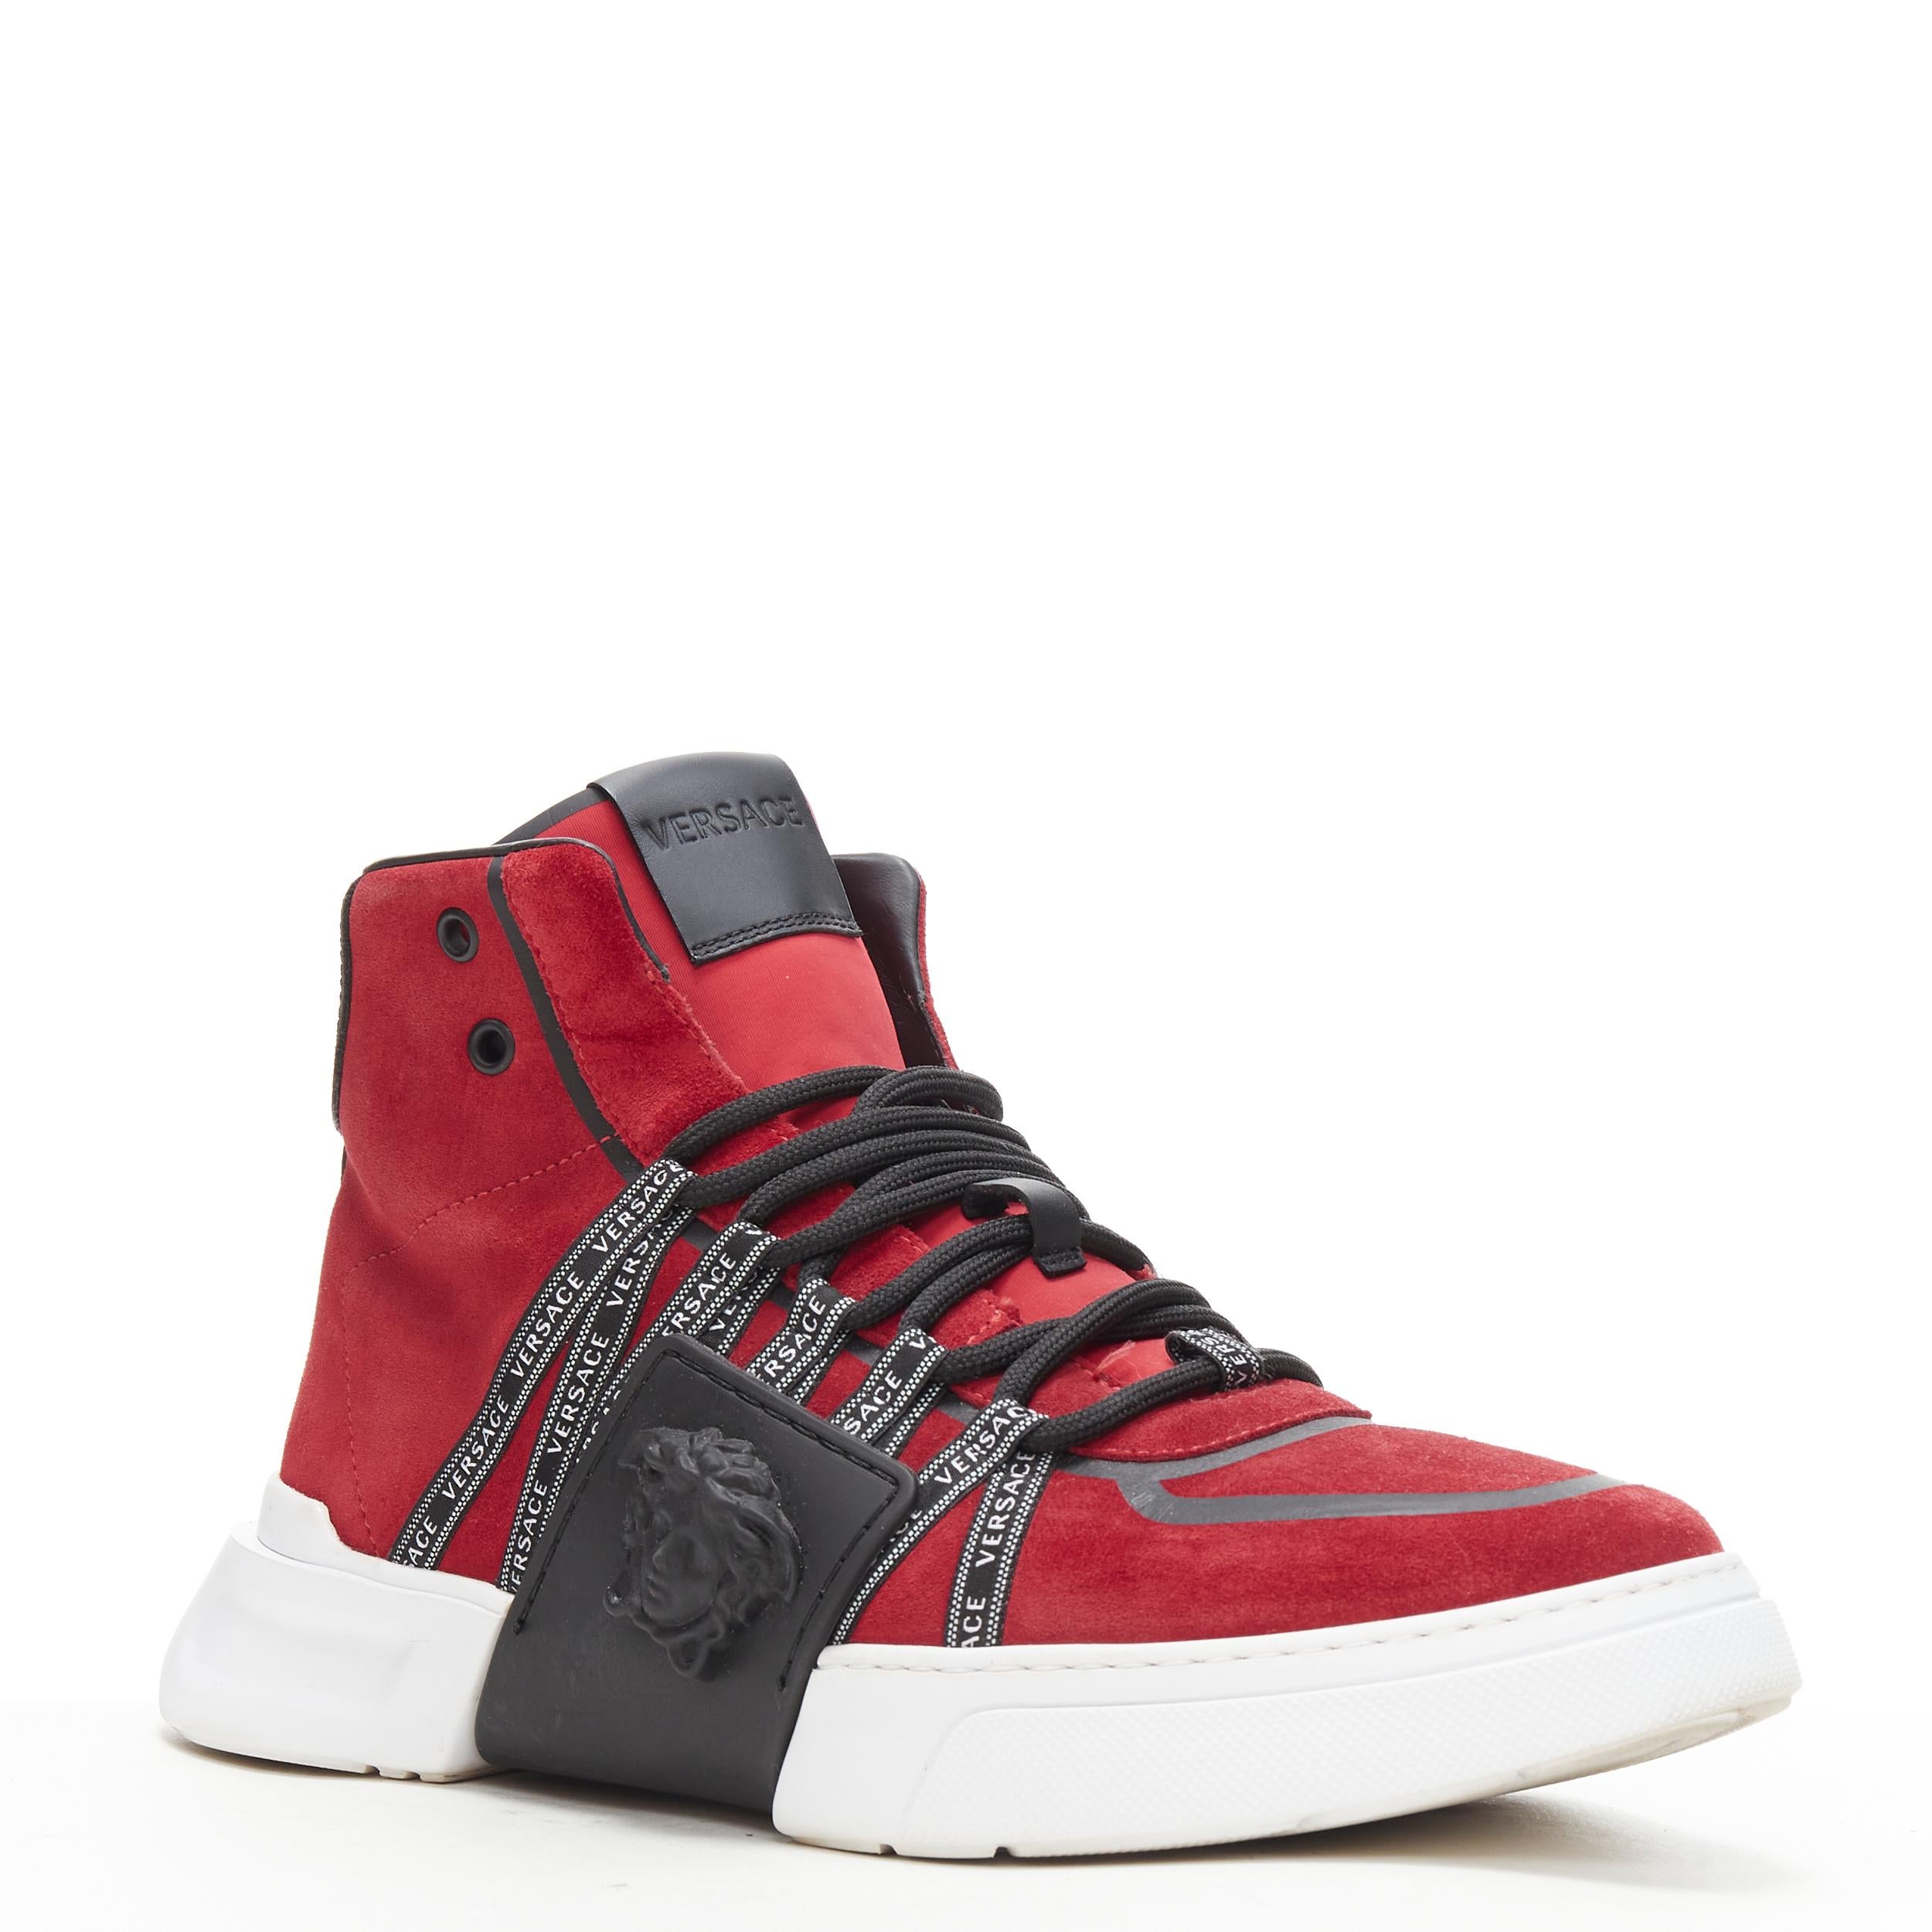 VERSACE red suede Medusa emblem nastro logo ribbon high top sneakers EU40 
Reference: TGAS/B01046 
Brand: Versace 
Designer: Donatella Versace 
Model: Medusa high top sneaker 
Material: Suede 
Color: Red 
Pattern: Solid 
Closure: Lace Up 
Extra